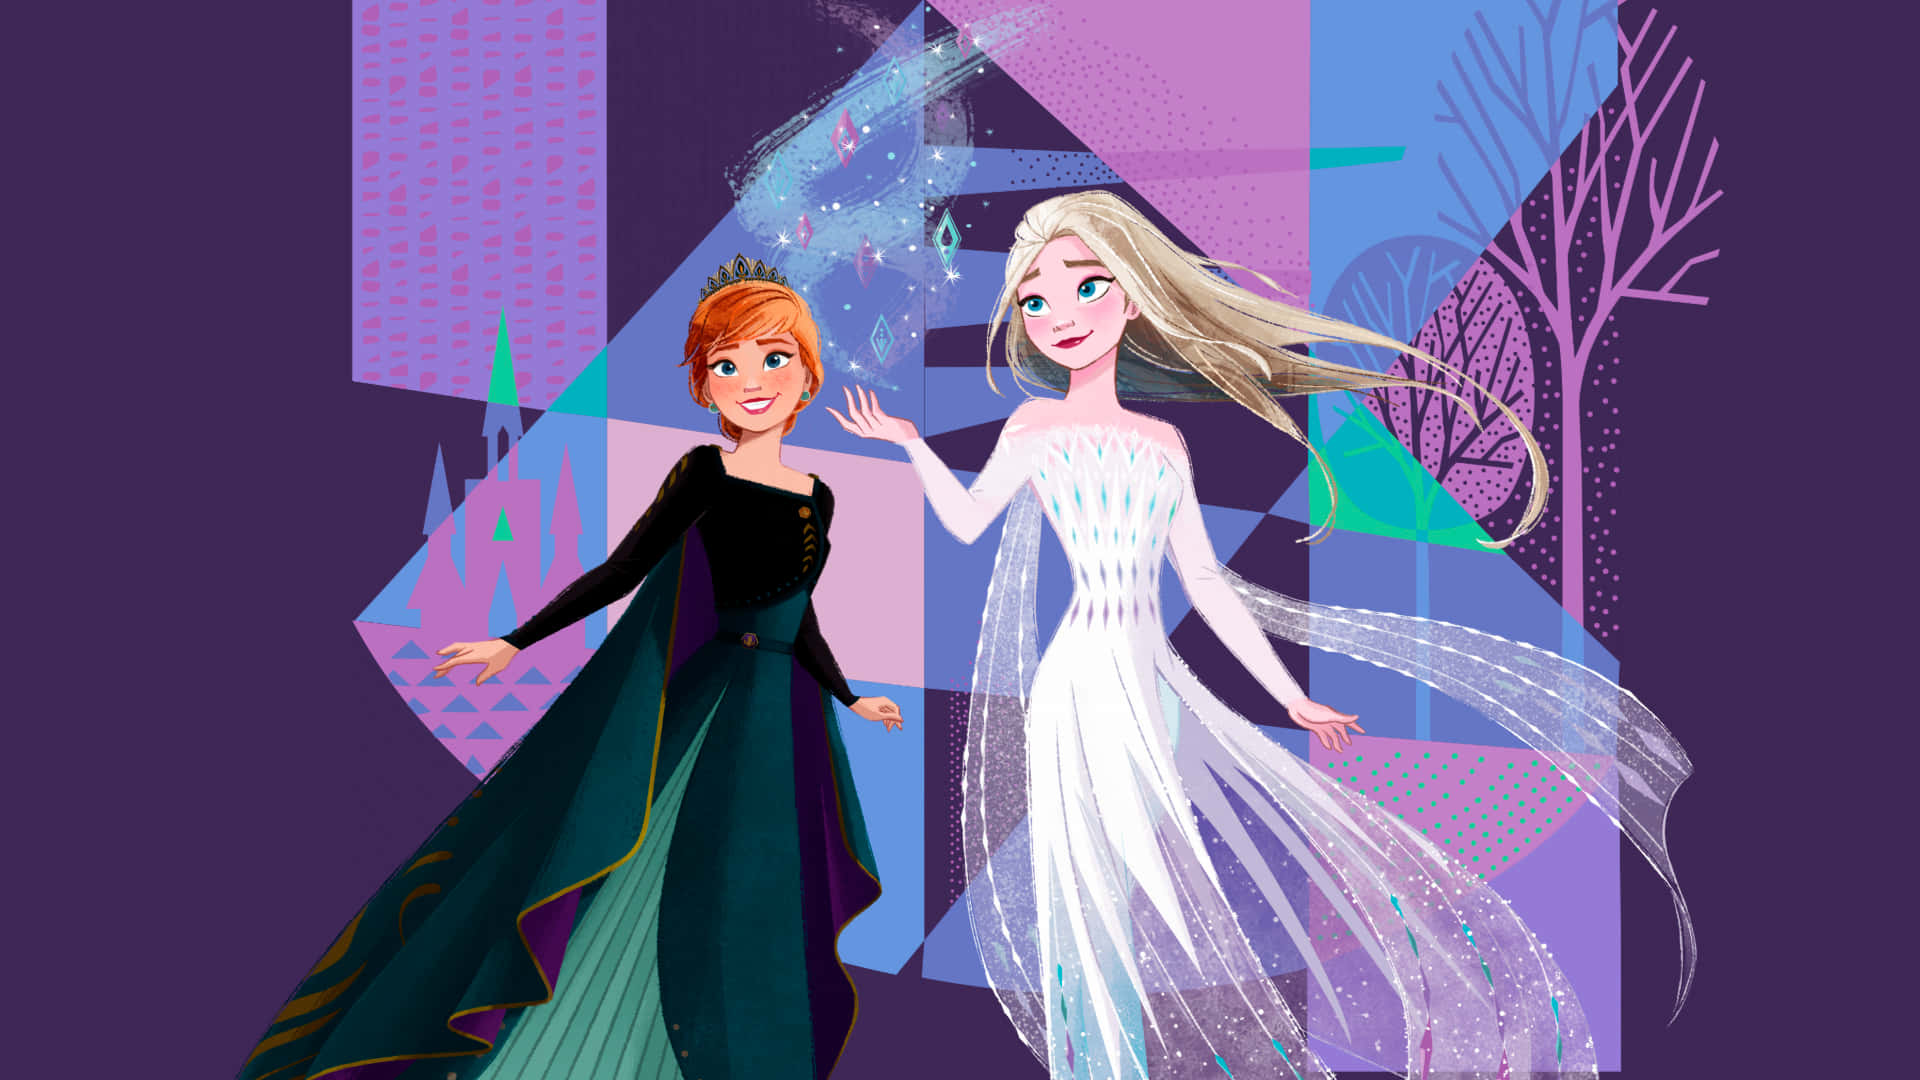 Get Ready For Frozen 2!